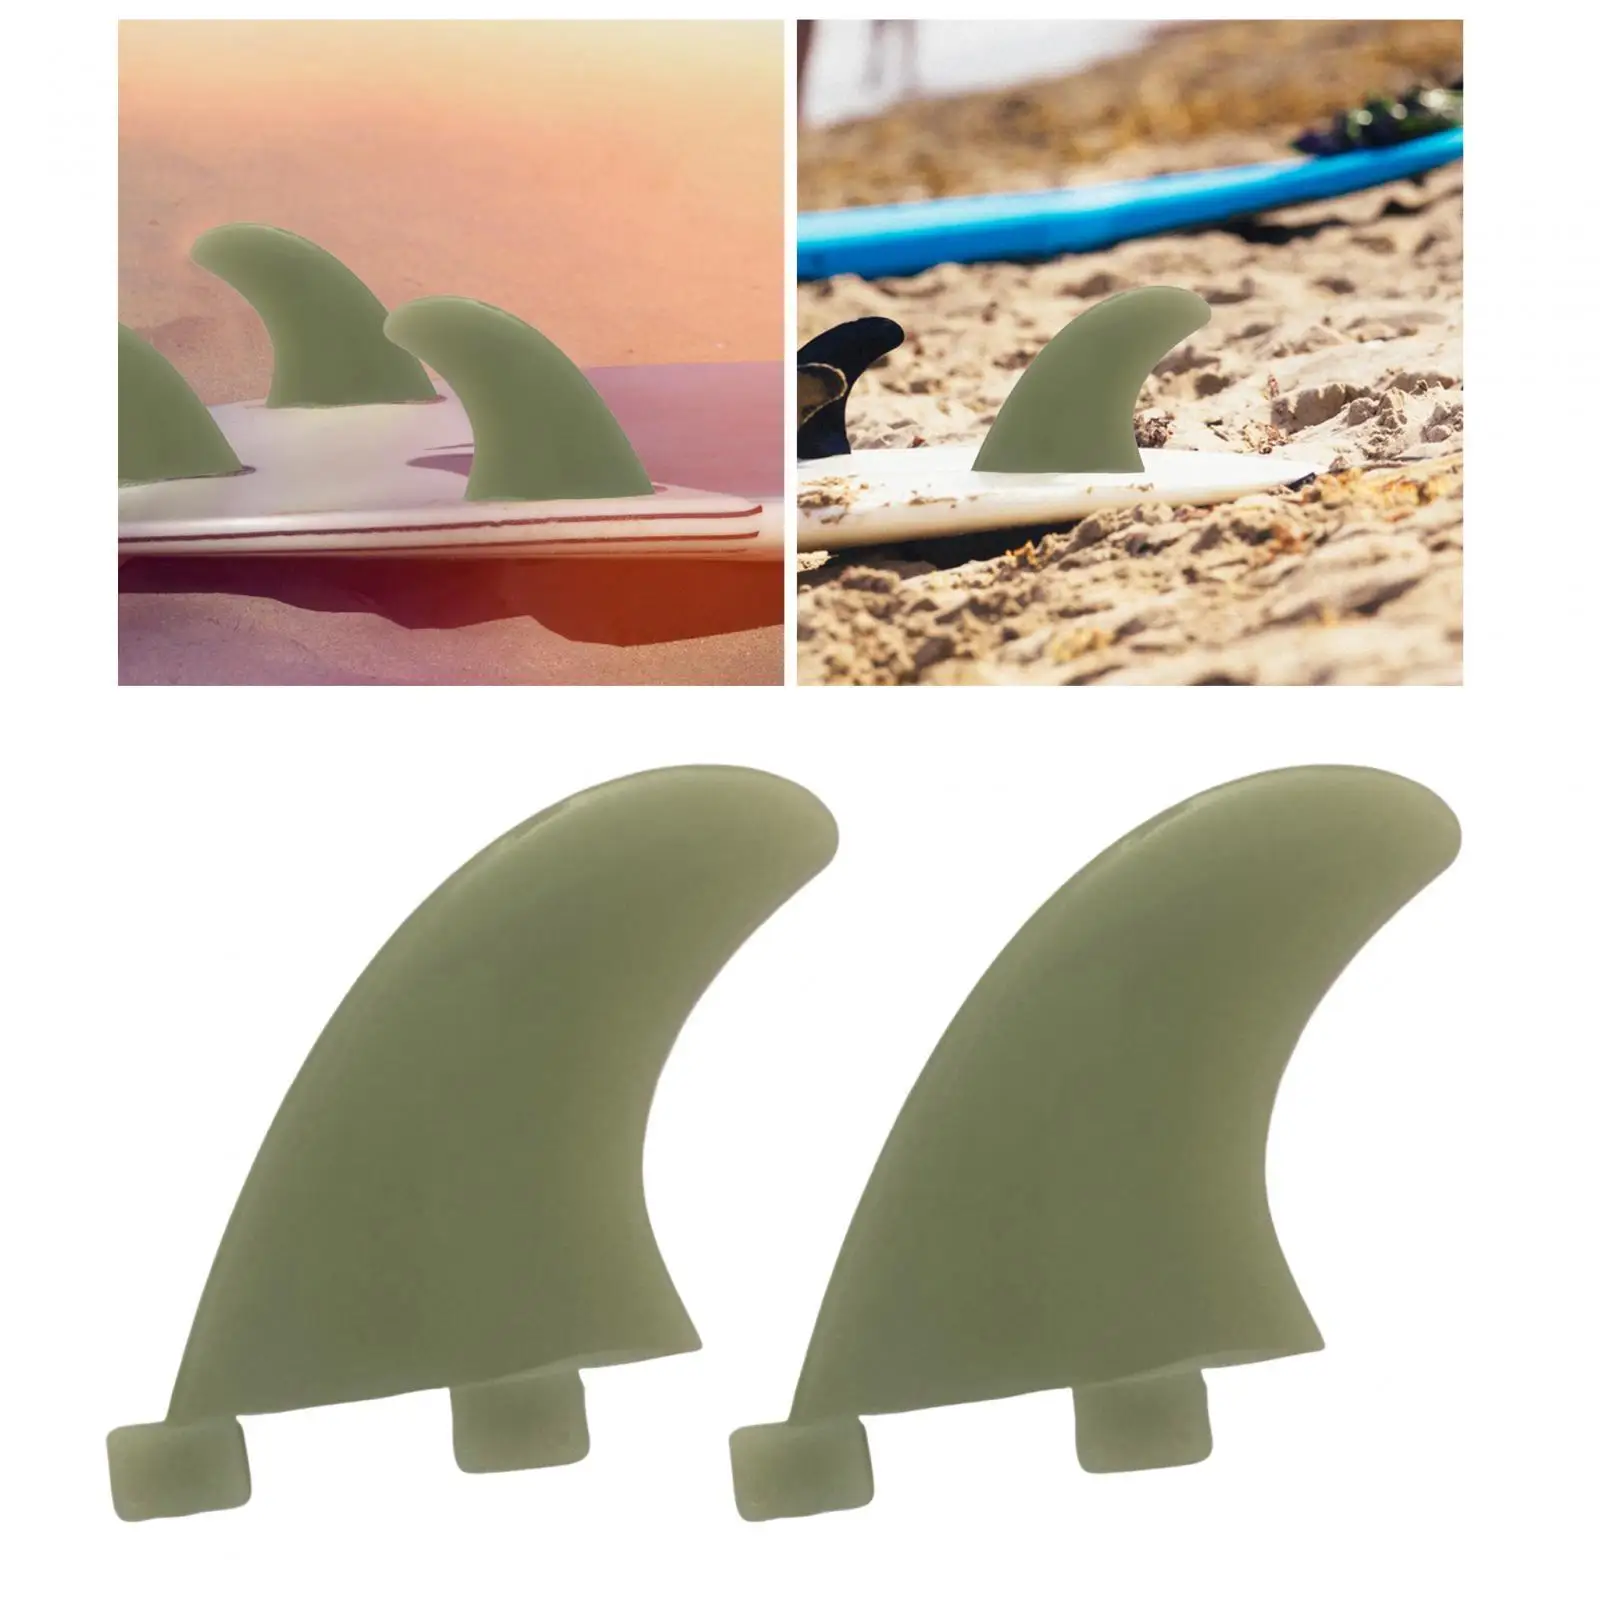 2x Surfboard Fin Surfing Quick Release Durable Replacement for Canoe Paddleboard Longboard Water Sports Accessory